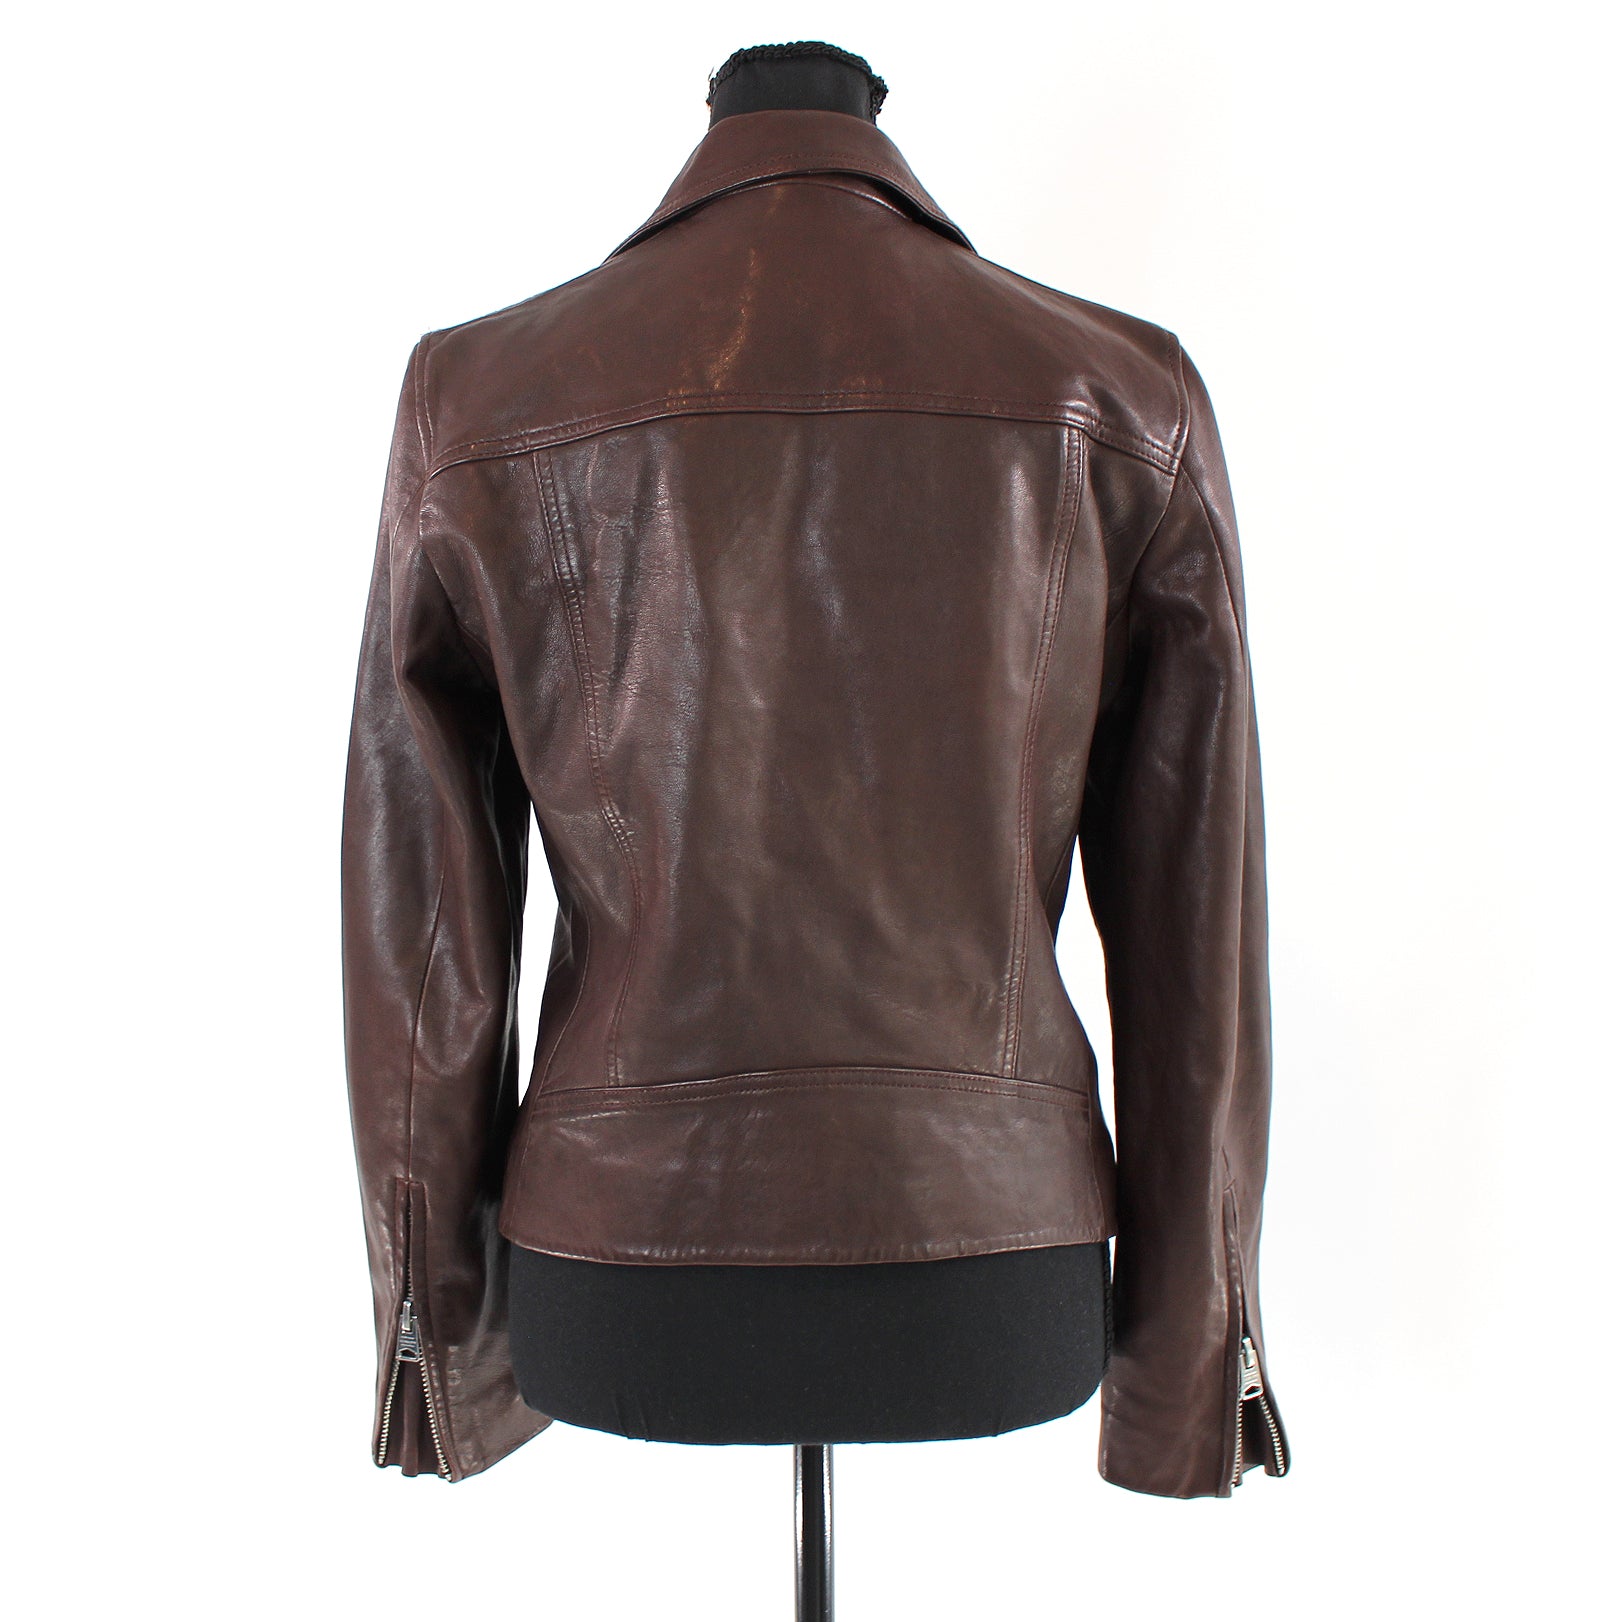 All Saints Dalby Oxblood Brown Closet Jacket The Zip-Up Biker – York Leather New